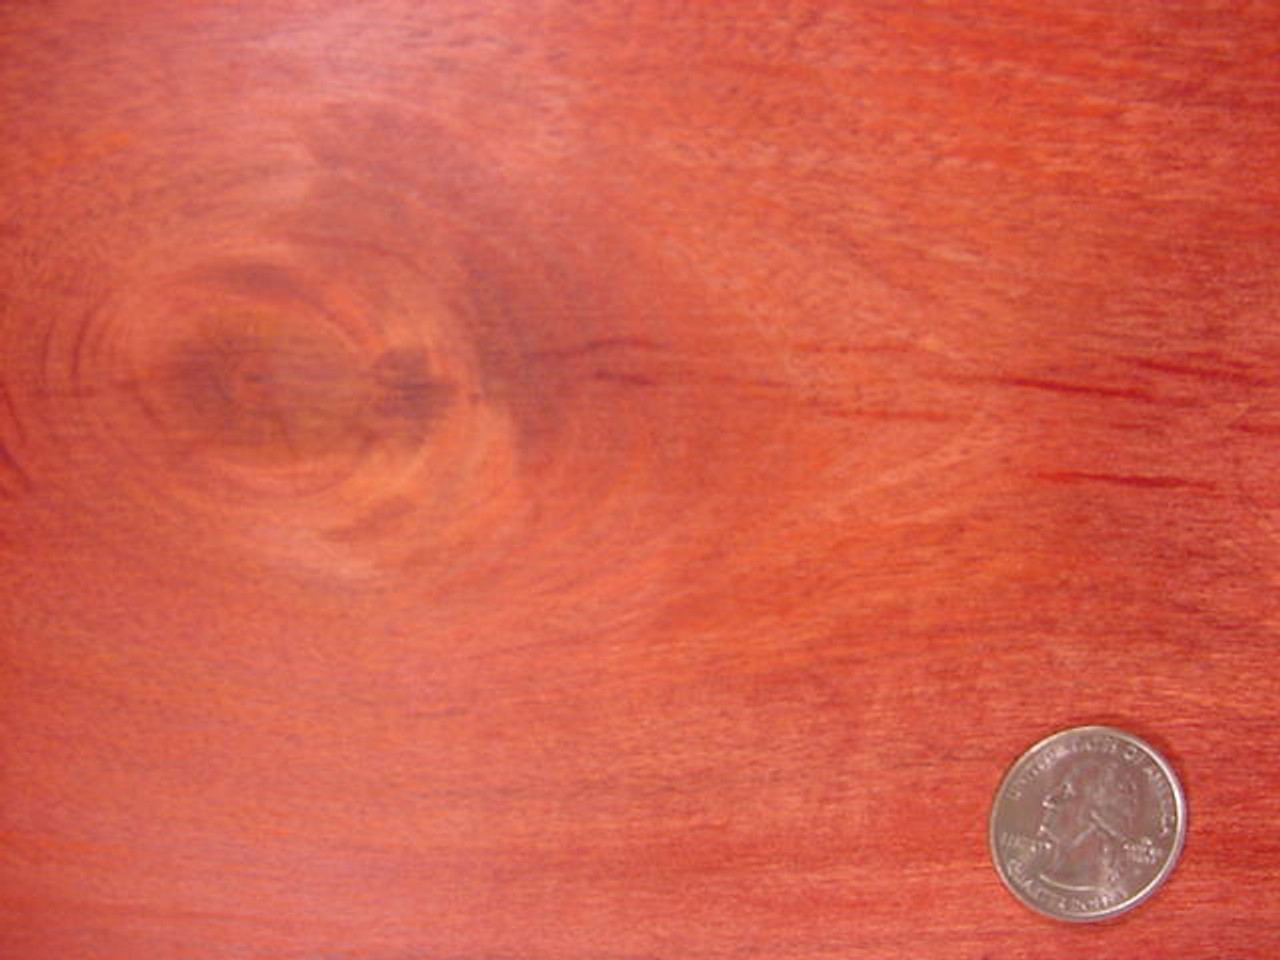 BLOODWOOD  3/4 X ? X 36 CLICK HERE